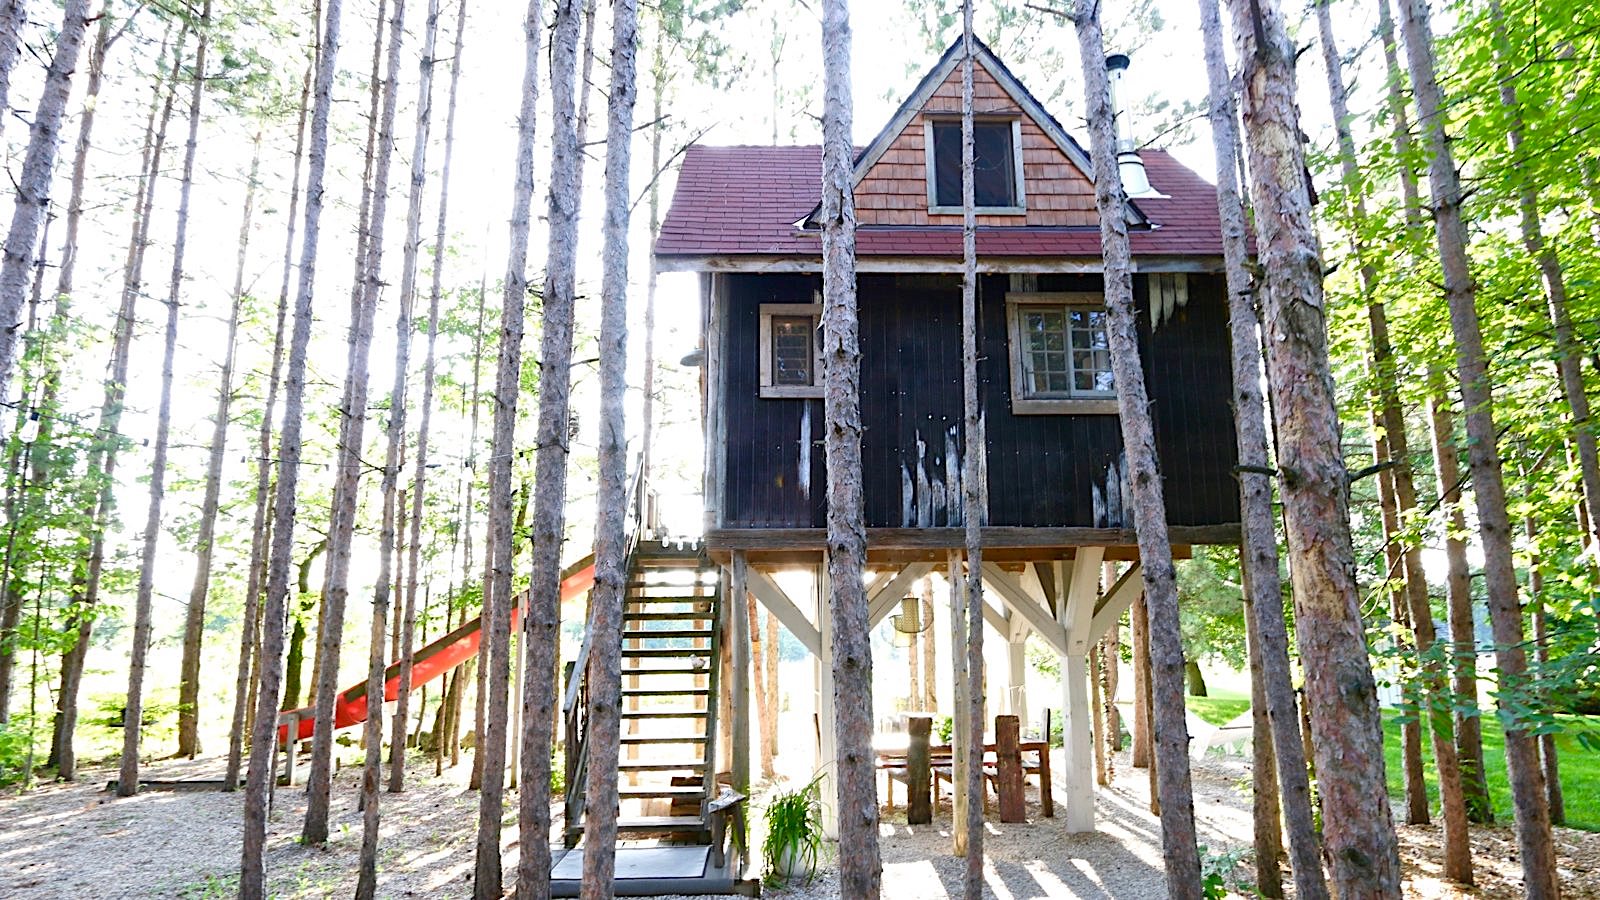 The building of the treehouse. Treehouse retreat in progress. DESIGN THE LIFE YOU WANT TO LIVE | Lynne Knowlton